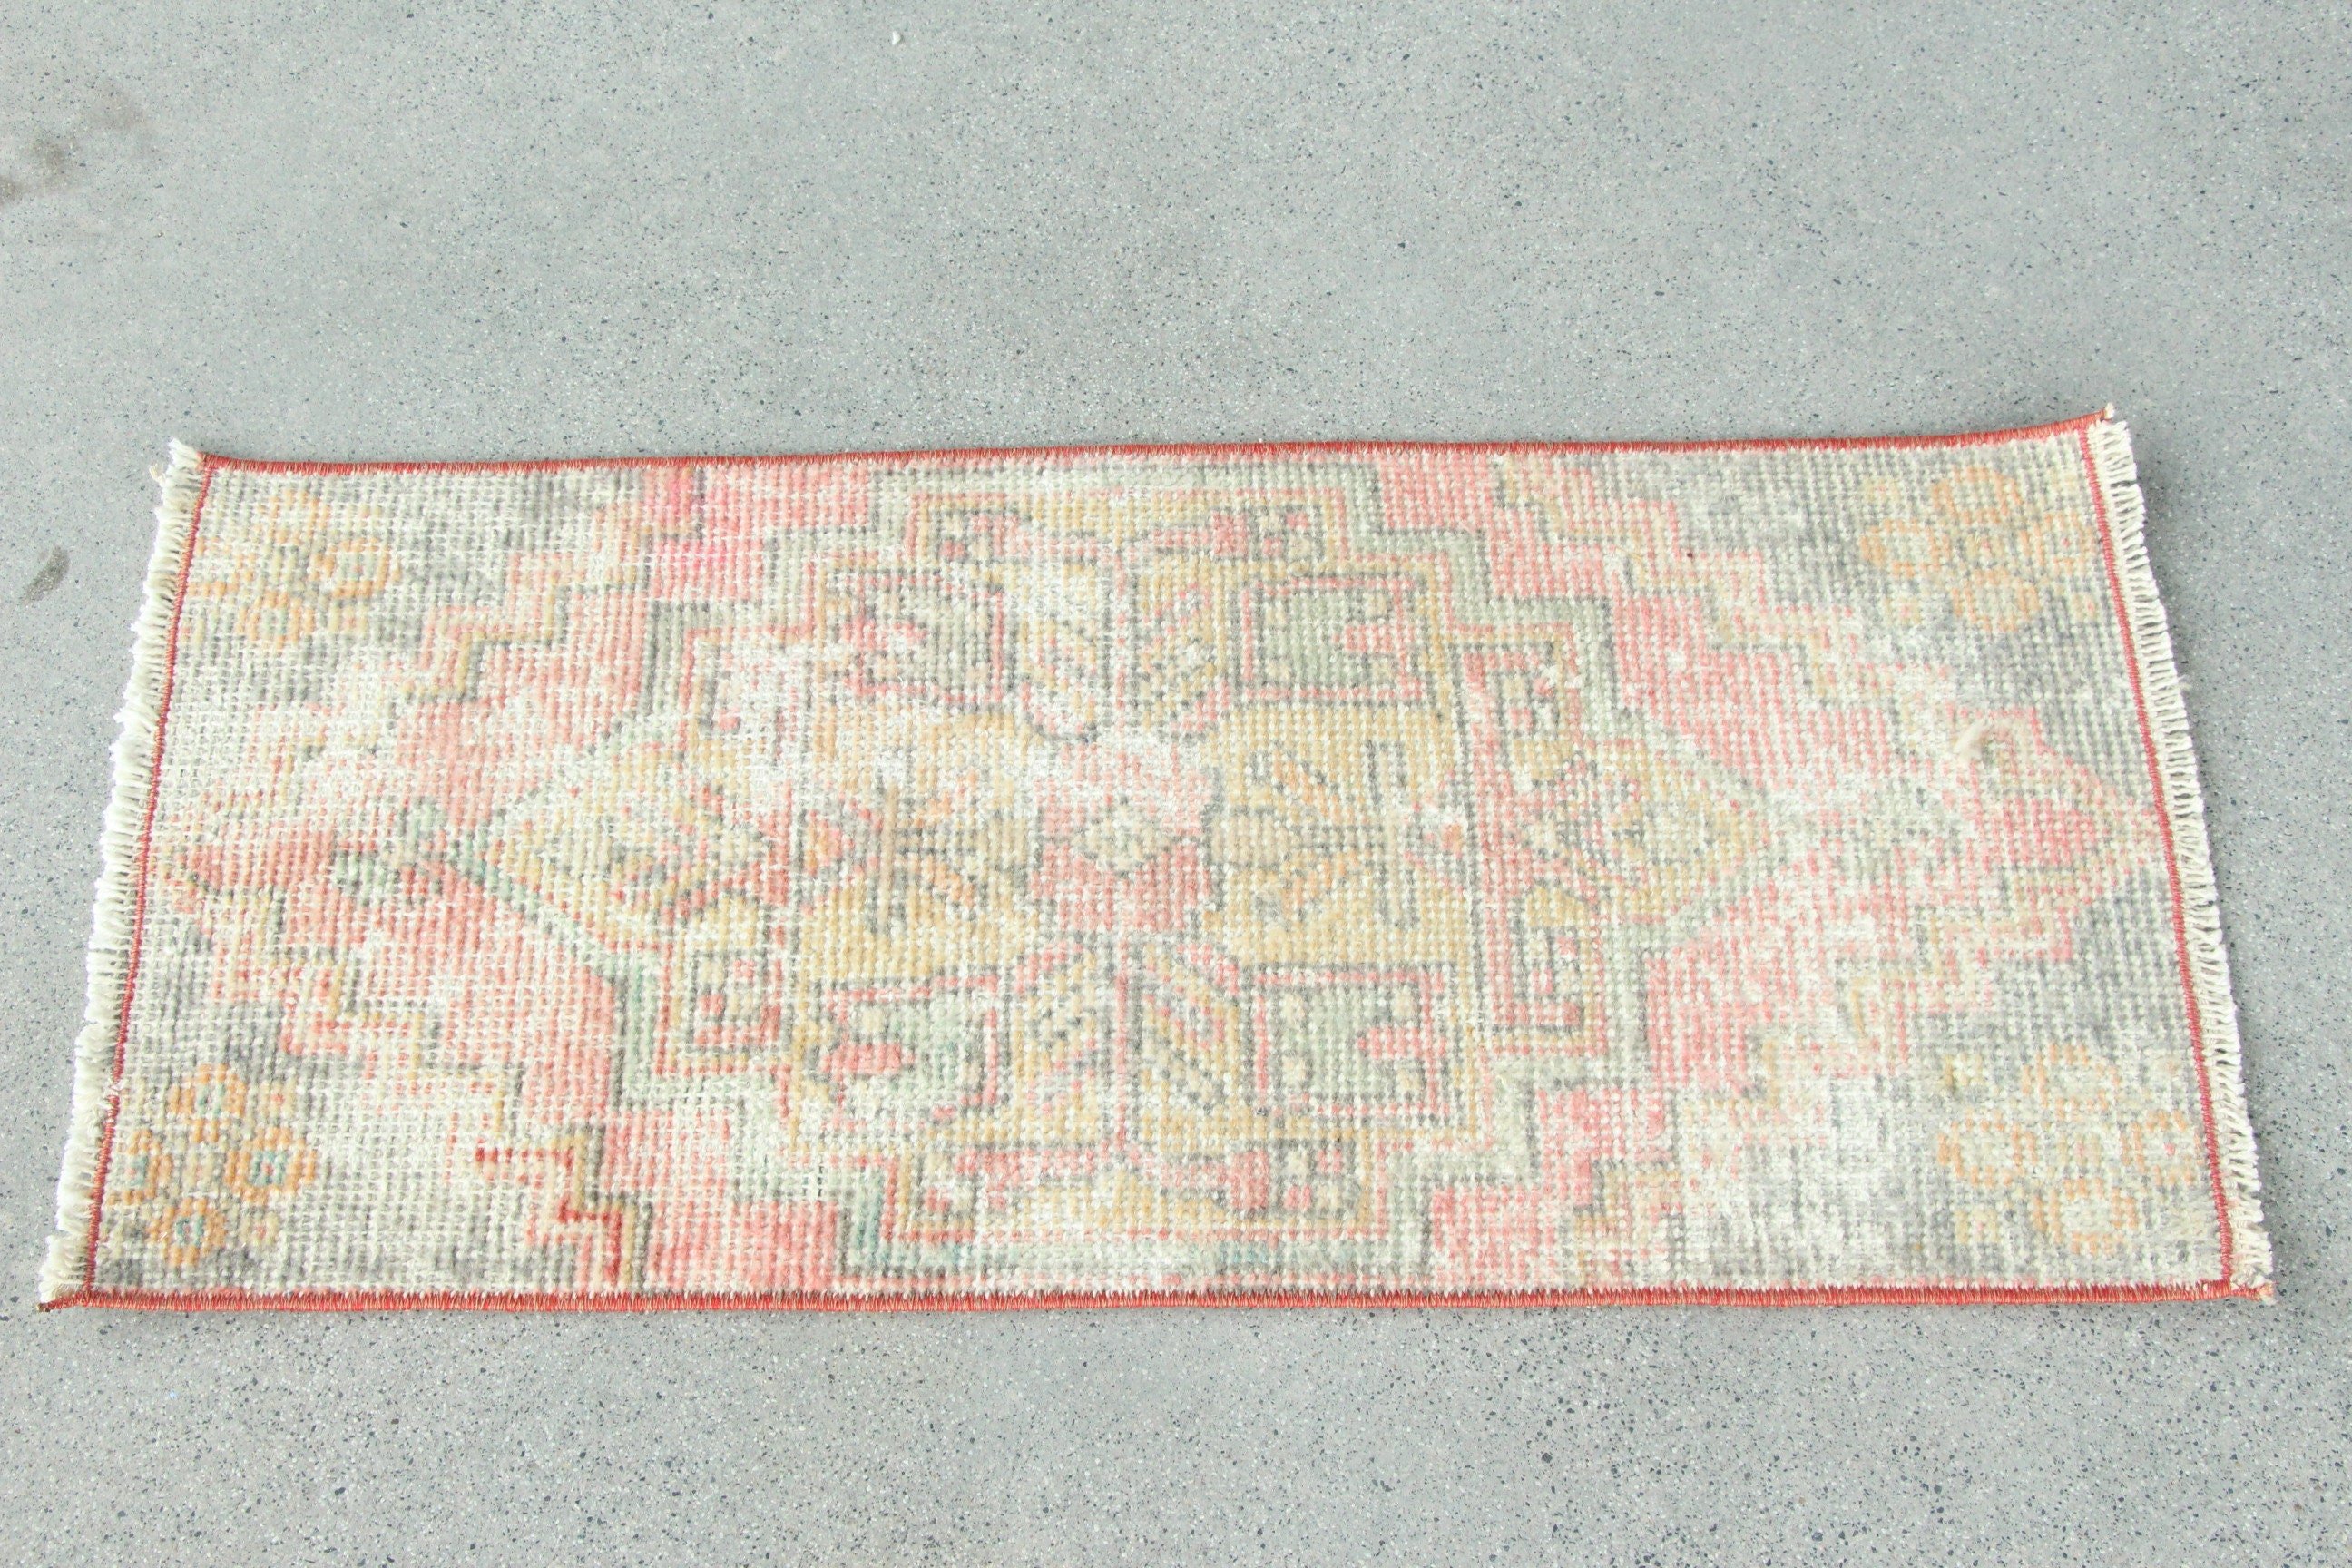 Vintage Rug, Entry Rug, 1.3x2.8 ft Small Rug, Turkish Rugs, Home Decor Rugs, Red Wool Rug, Rugs for Wall Hanging, Kitchen Rug, Wool Rug